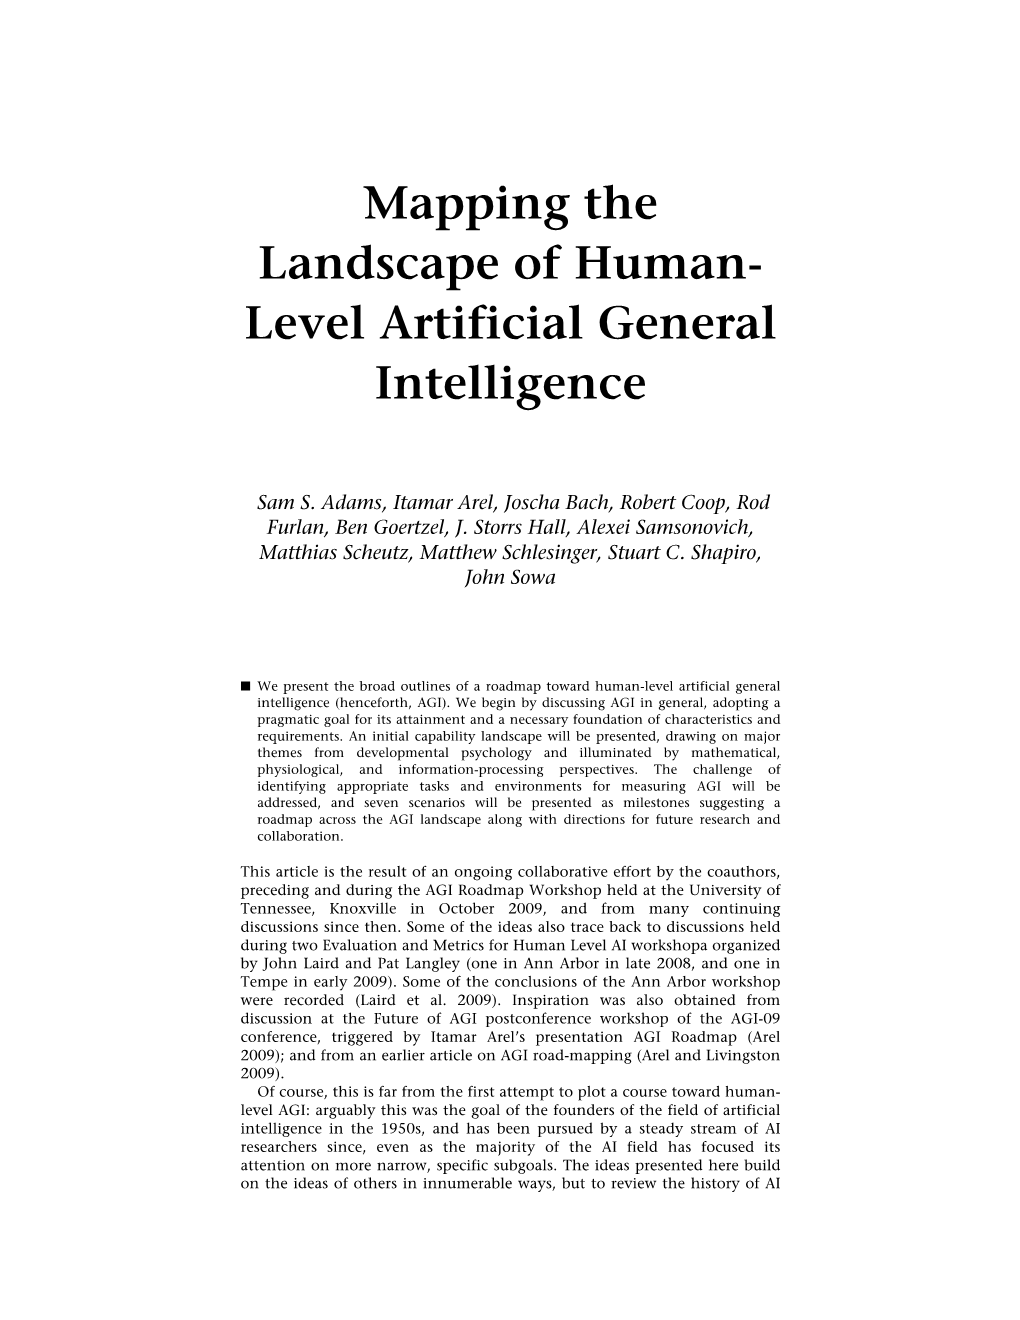 Mapping the Landscape of Human- Level Artificial General Intelligence